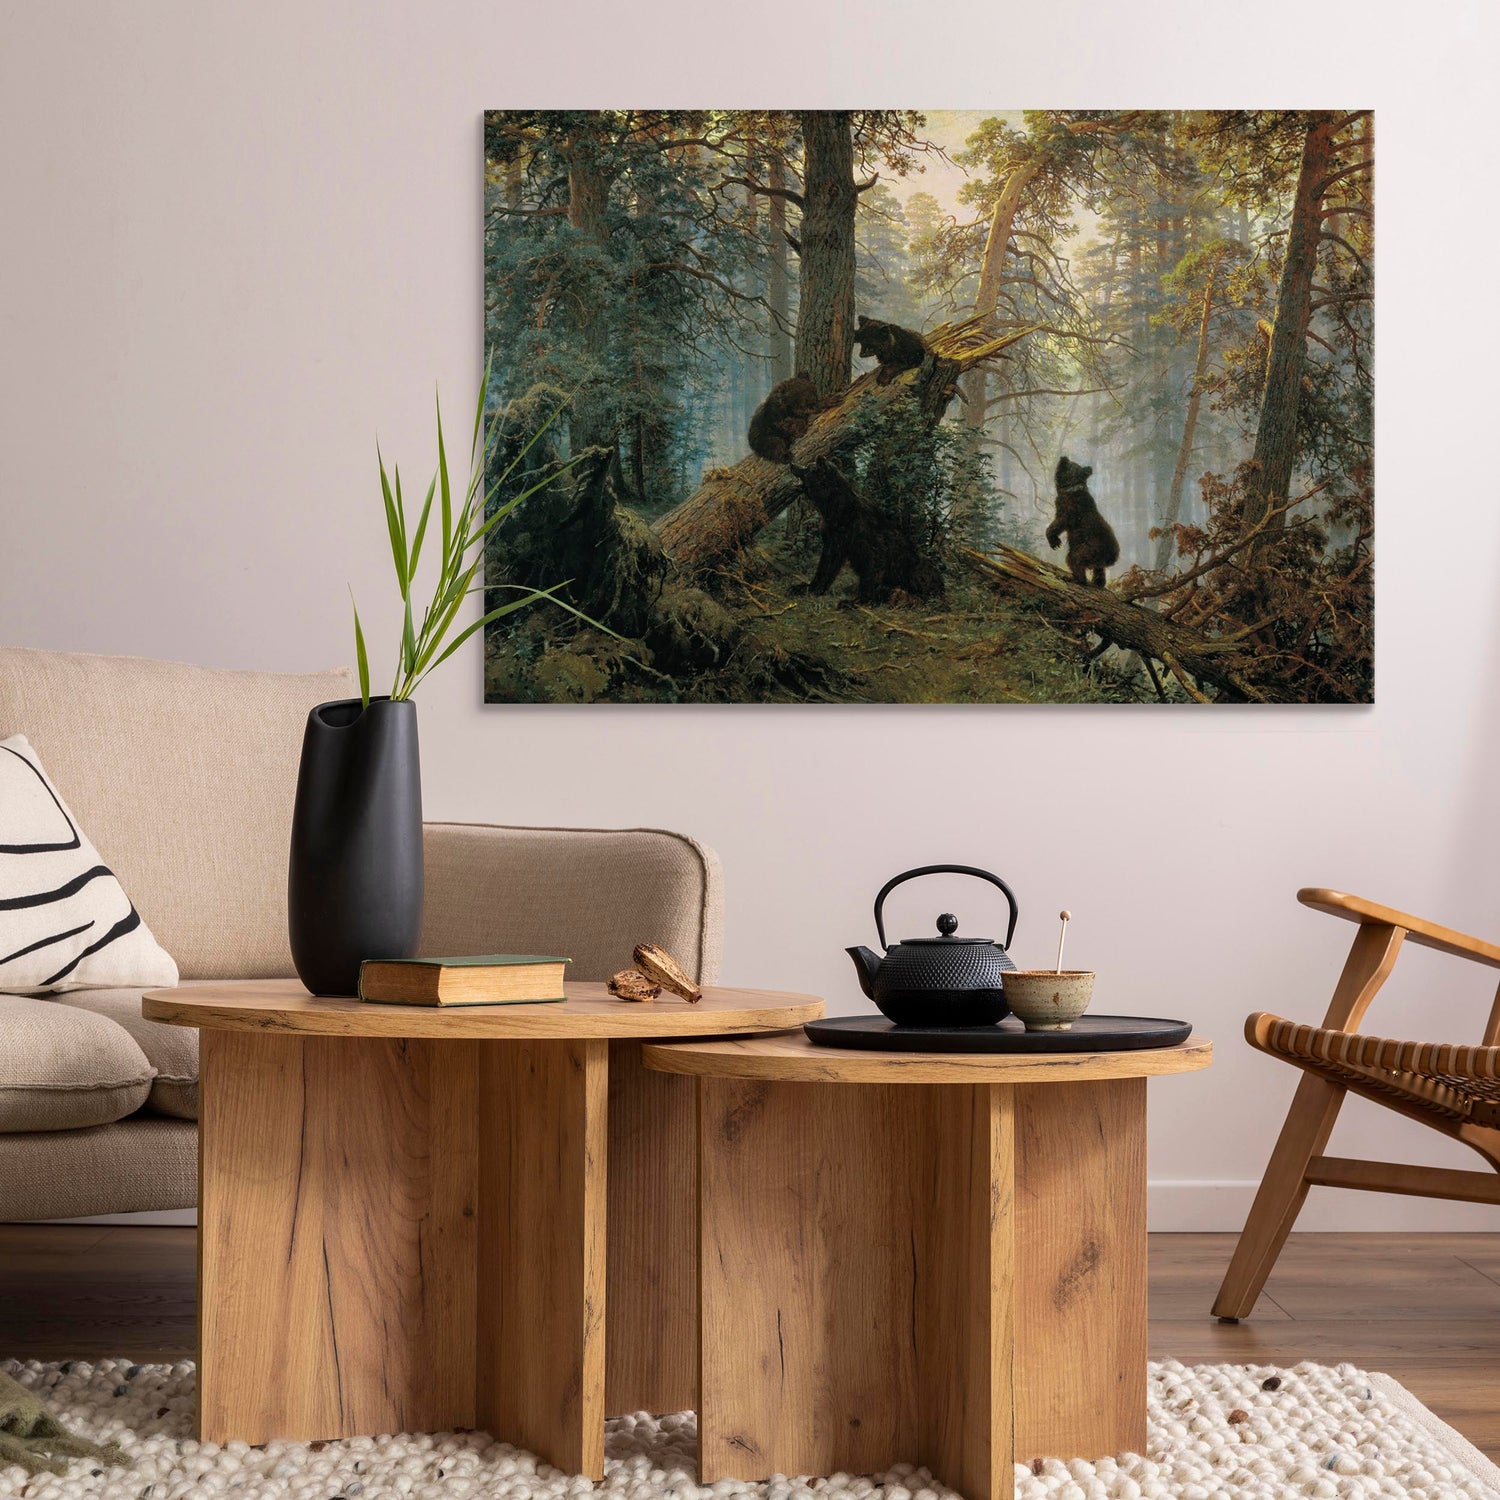 Reproduction Canvas Wall Art - Morning in a Pine Forest